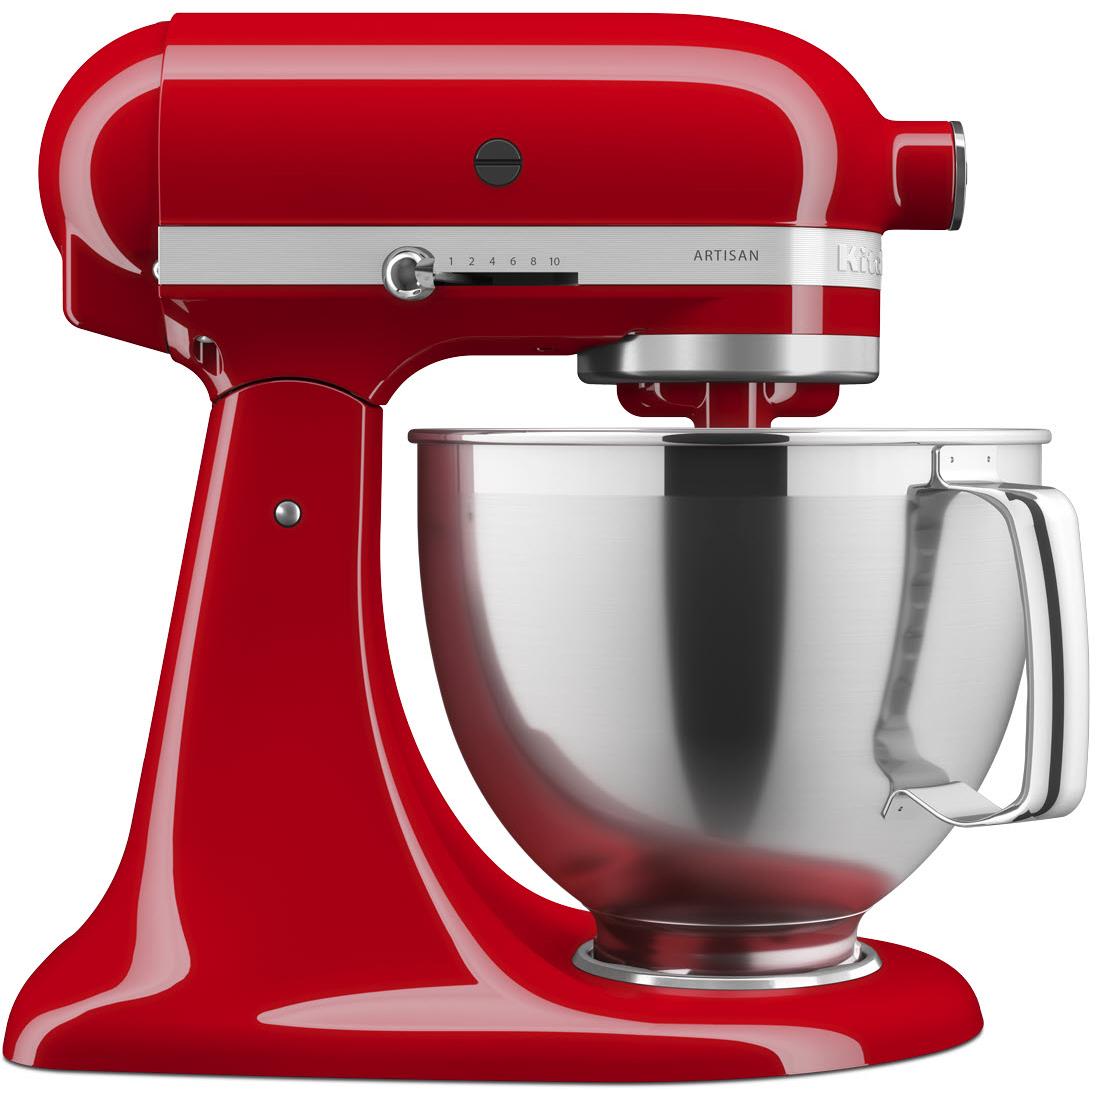 Tuesday's Tools and Tips- Bosch Mixer or Kitchen Aid